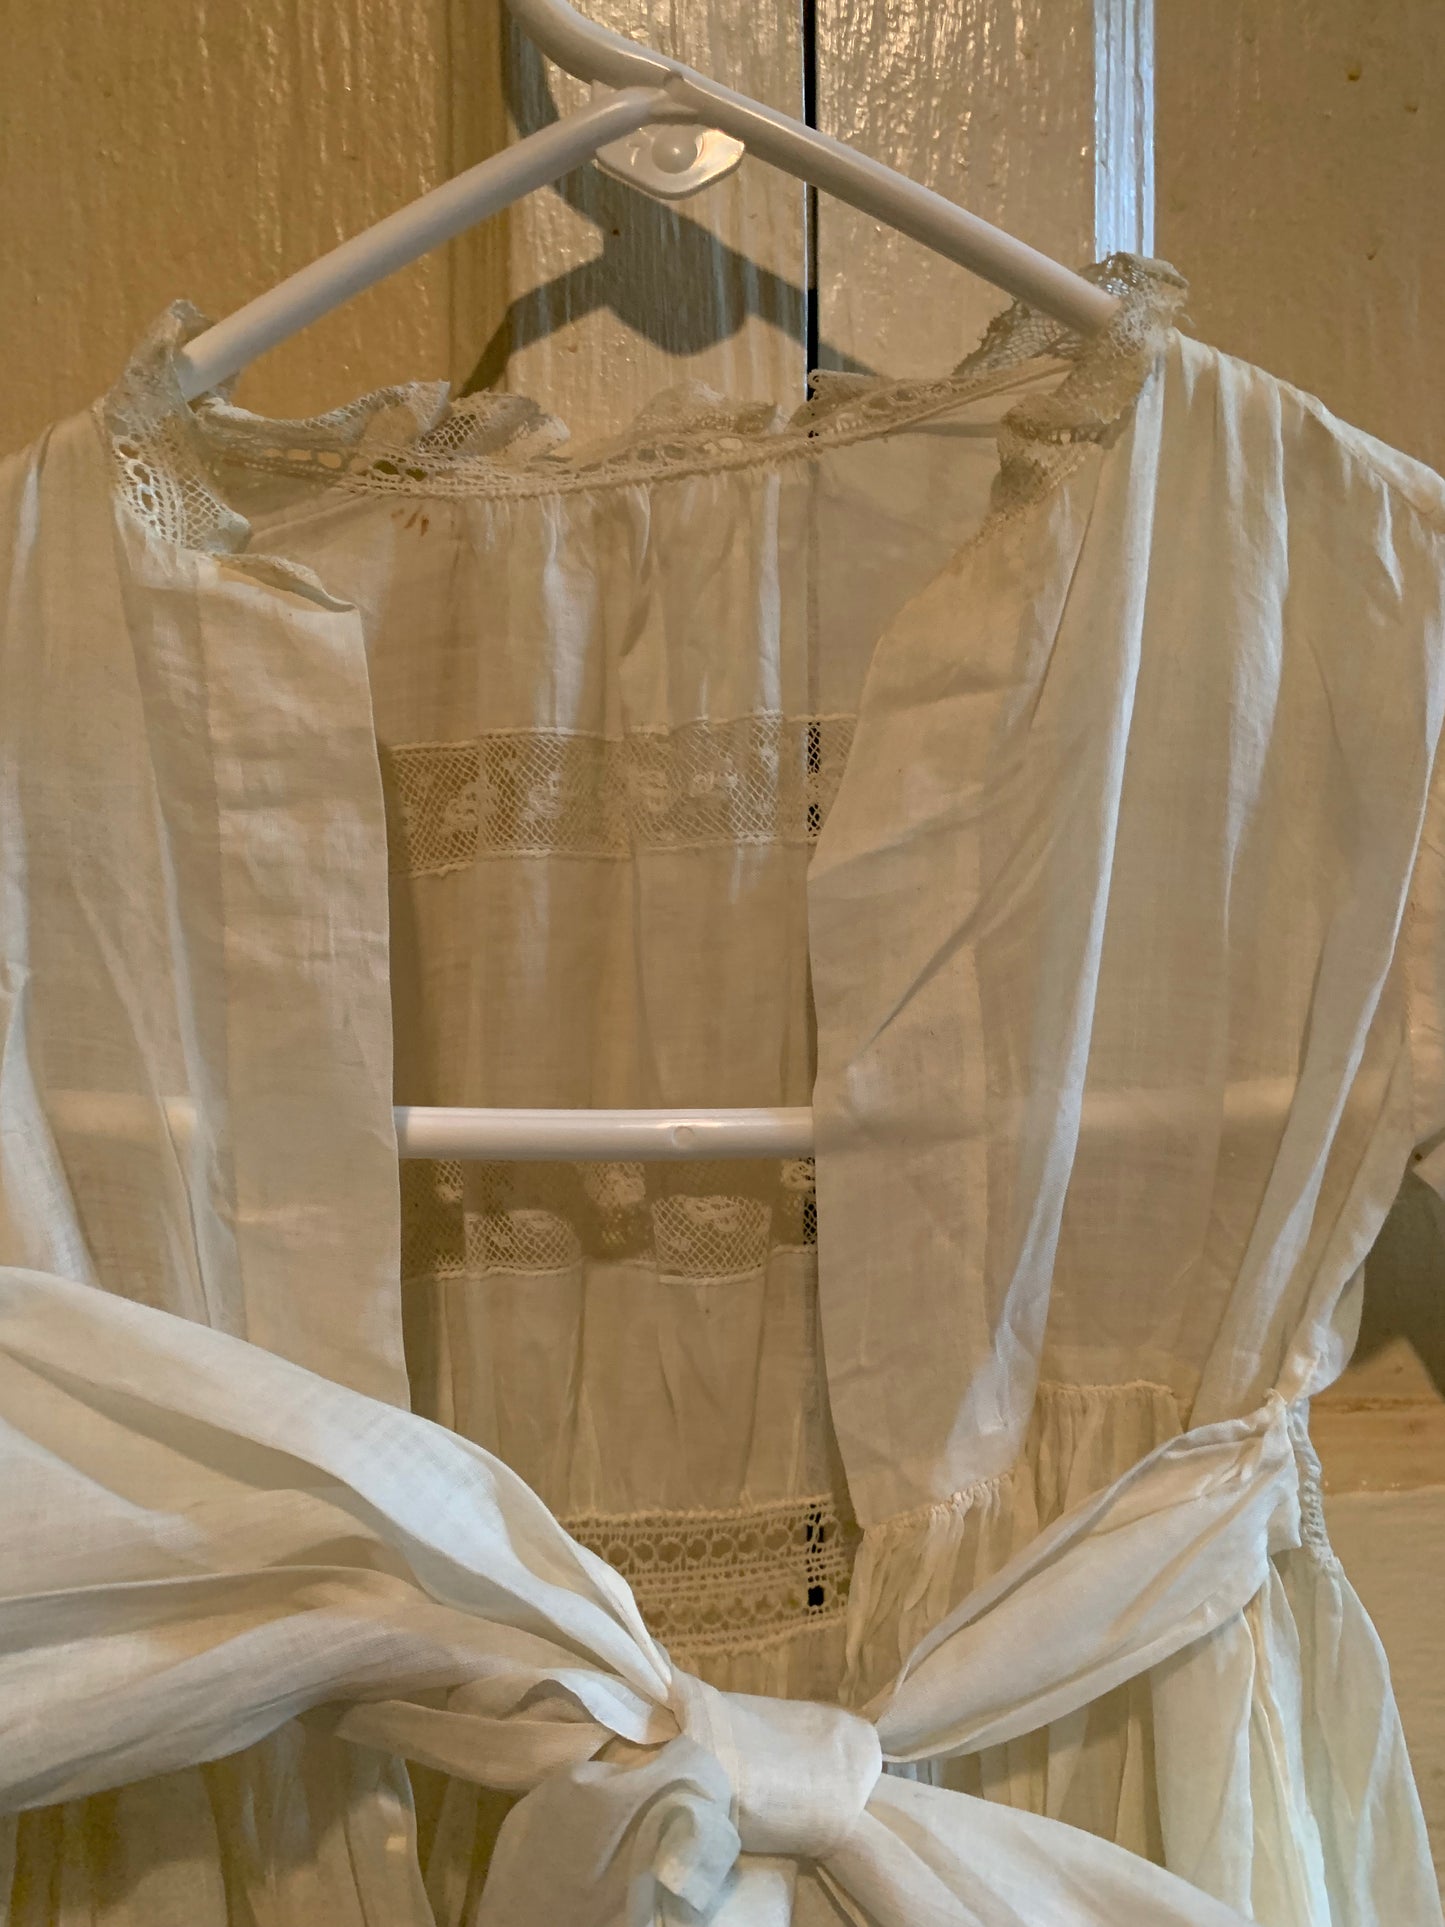 Lawn Cotton and Lace Christening Gown with Sash circa 1910s